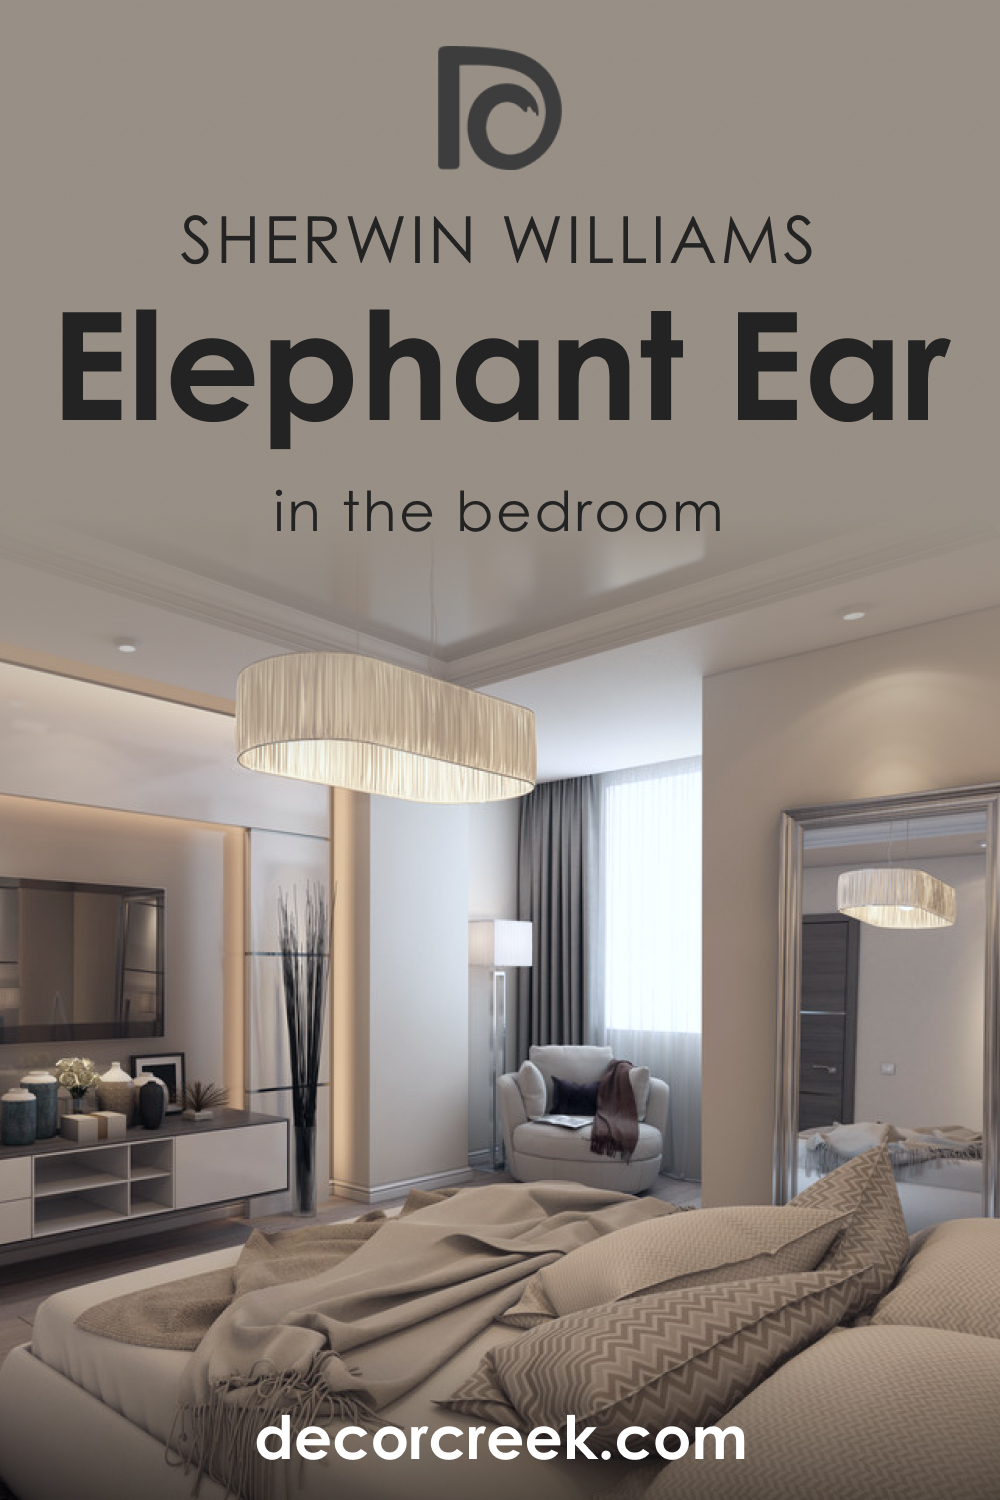 How to Use SW 9168 Elephant Ear in the Bedroom?